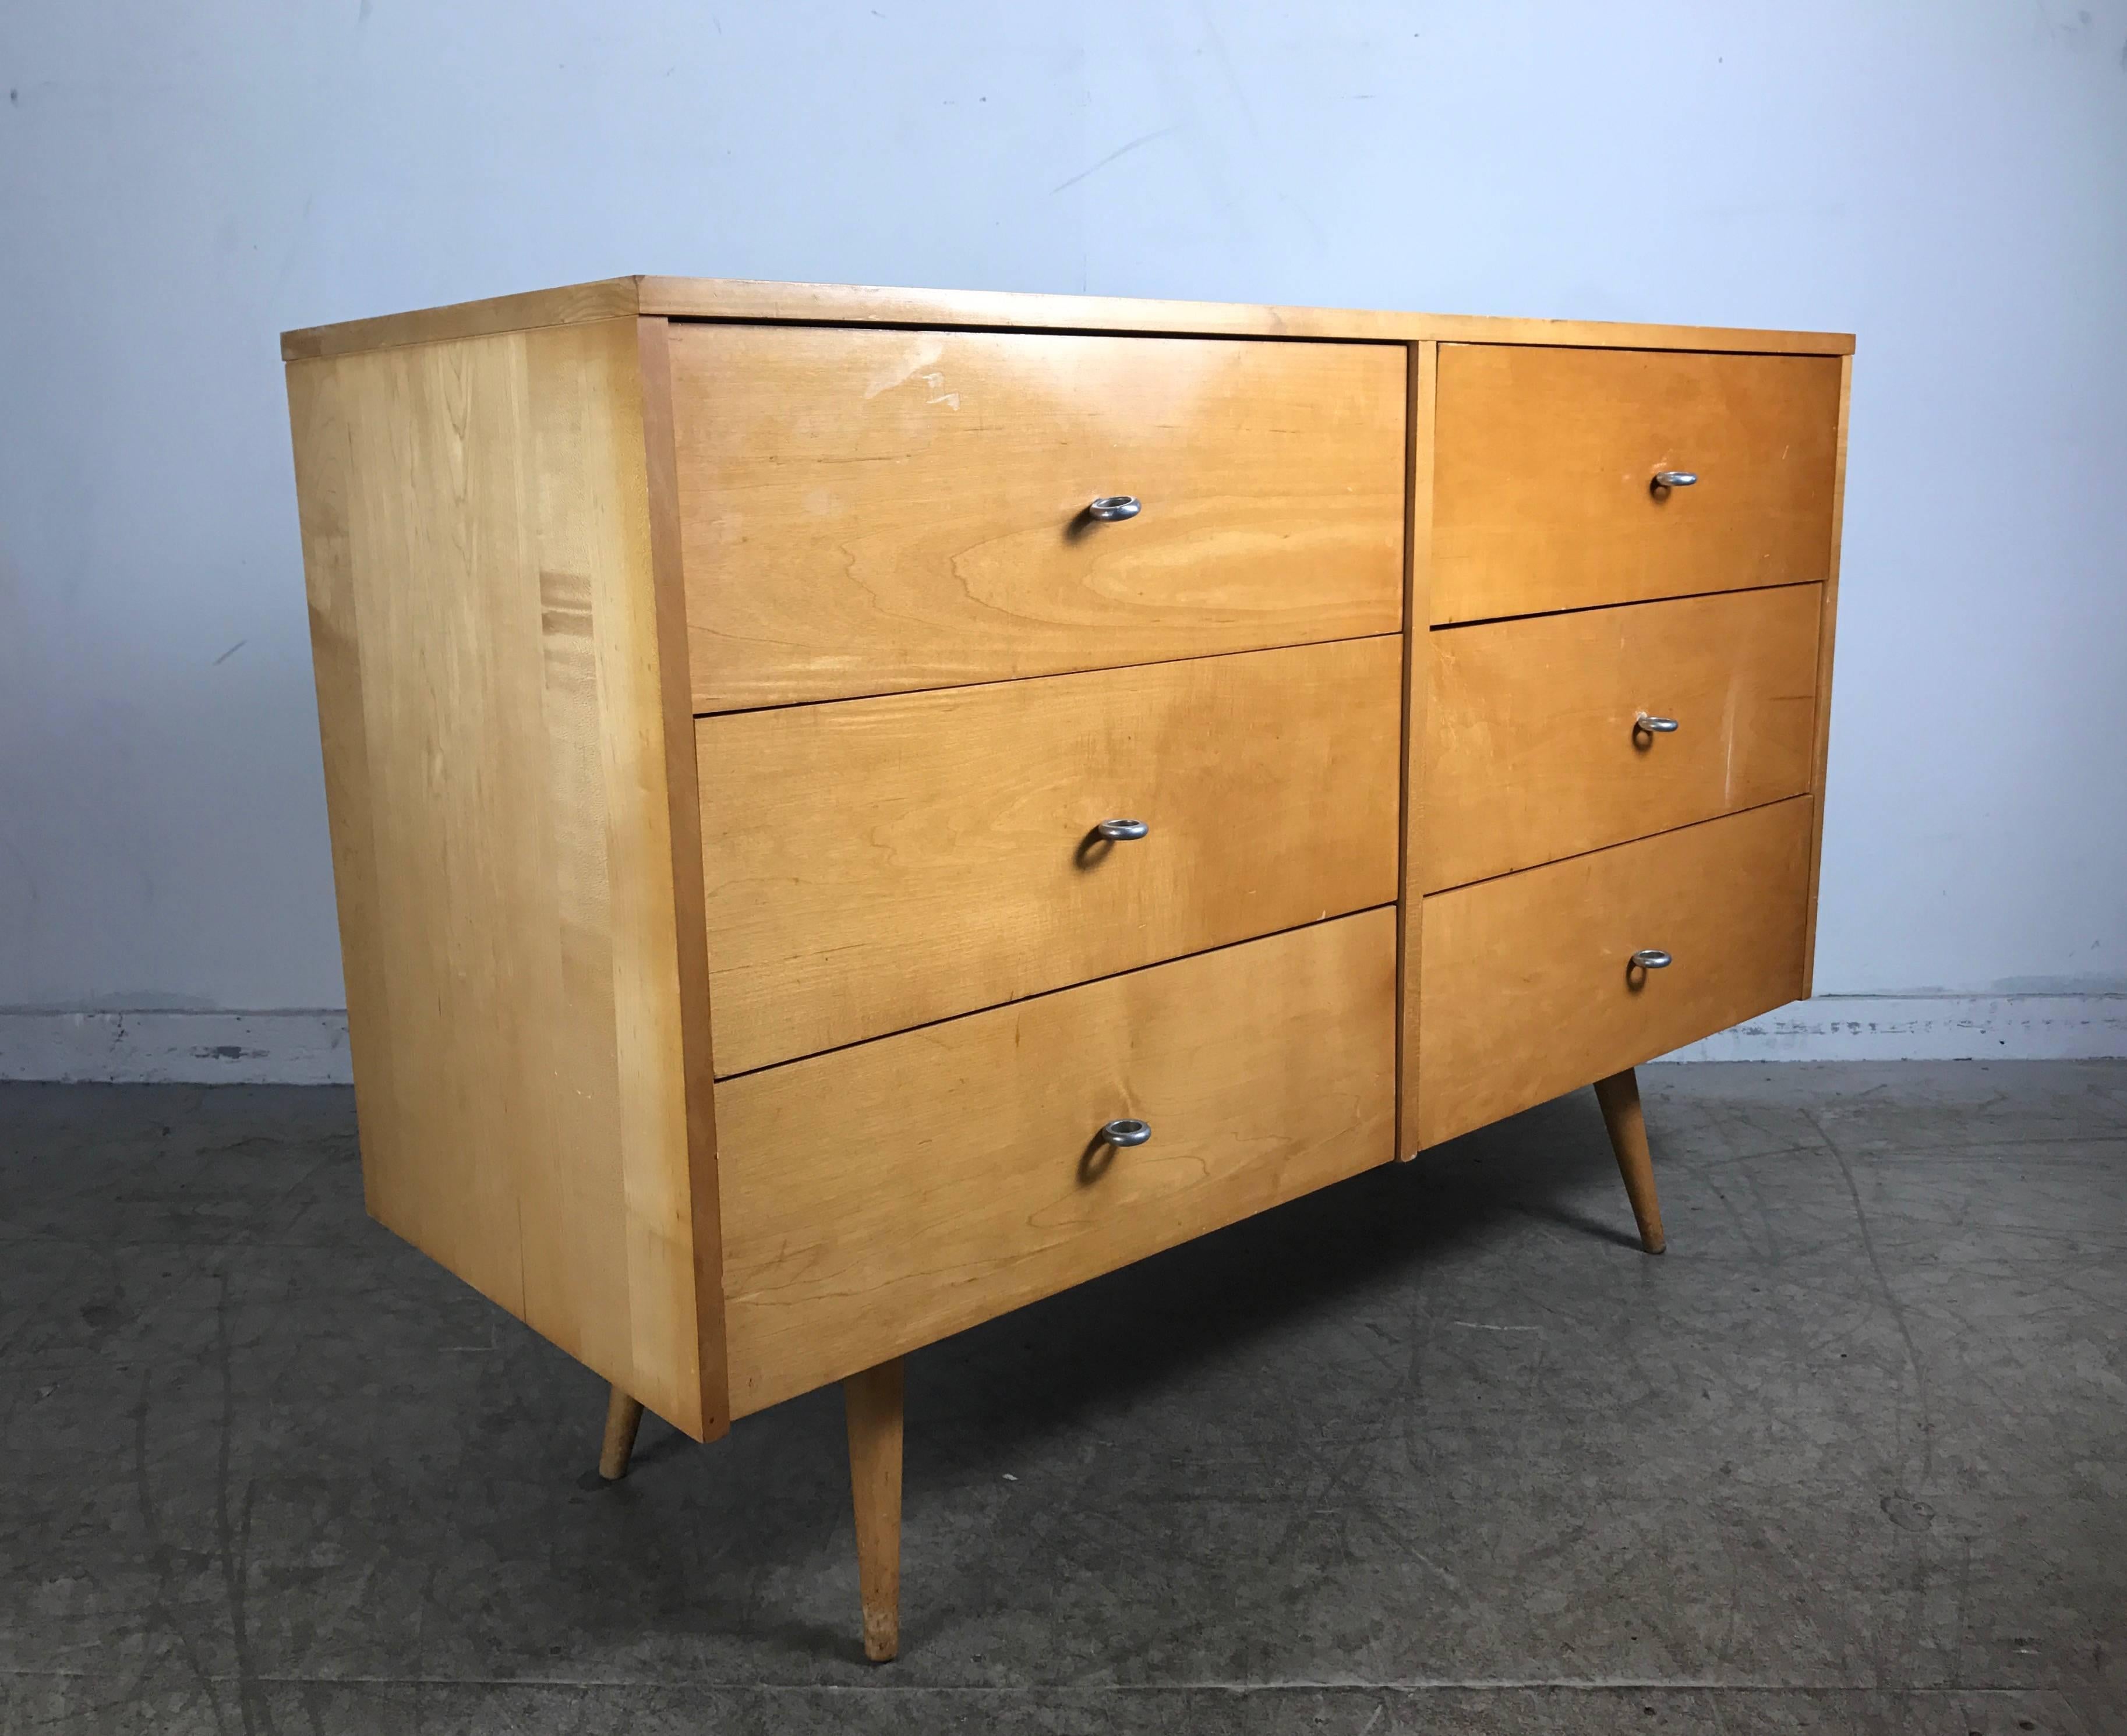 Classic Modernist six-drawer dresser Planner Group by Paul McCobb, retains original blonde wood finish and patina as well as Paul McCobb burn label, original aluminum ring pulls, hand delivery available to New York City or anywhere en route from